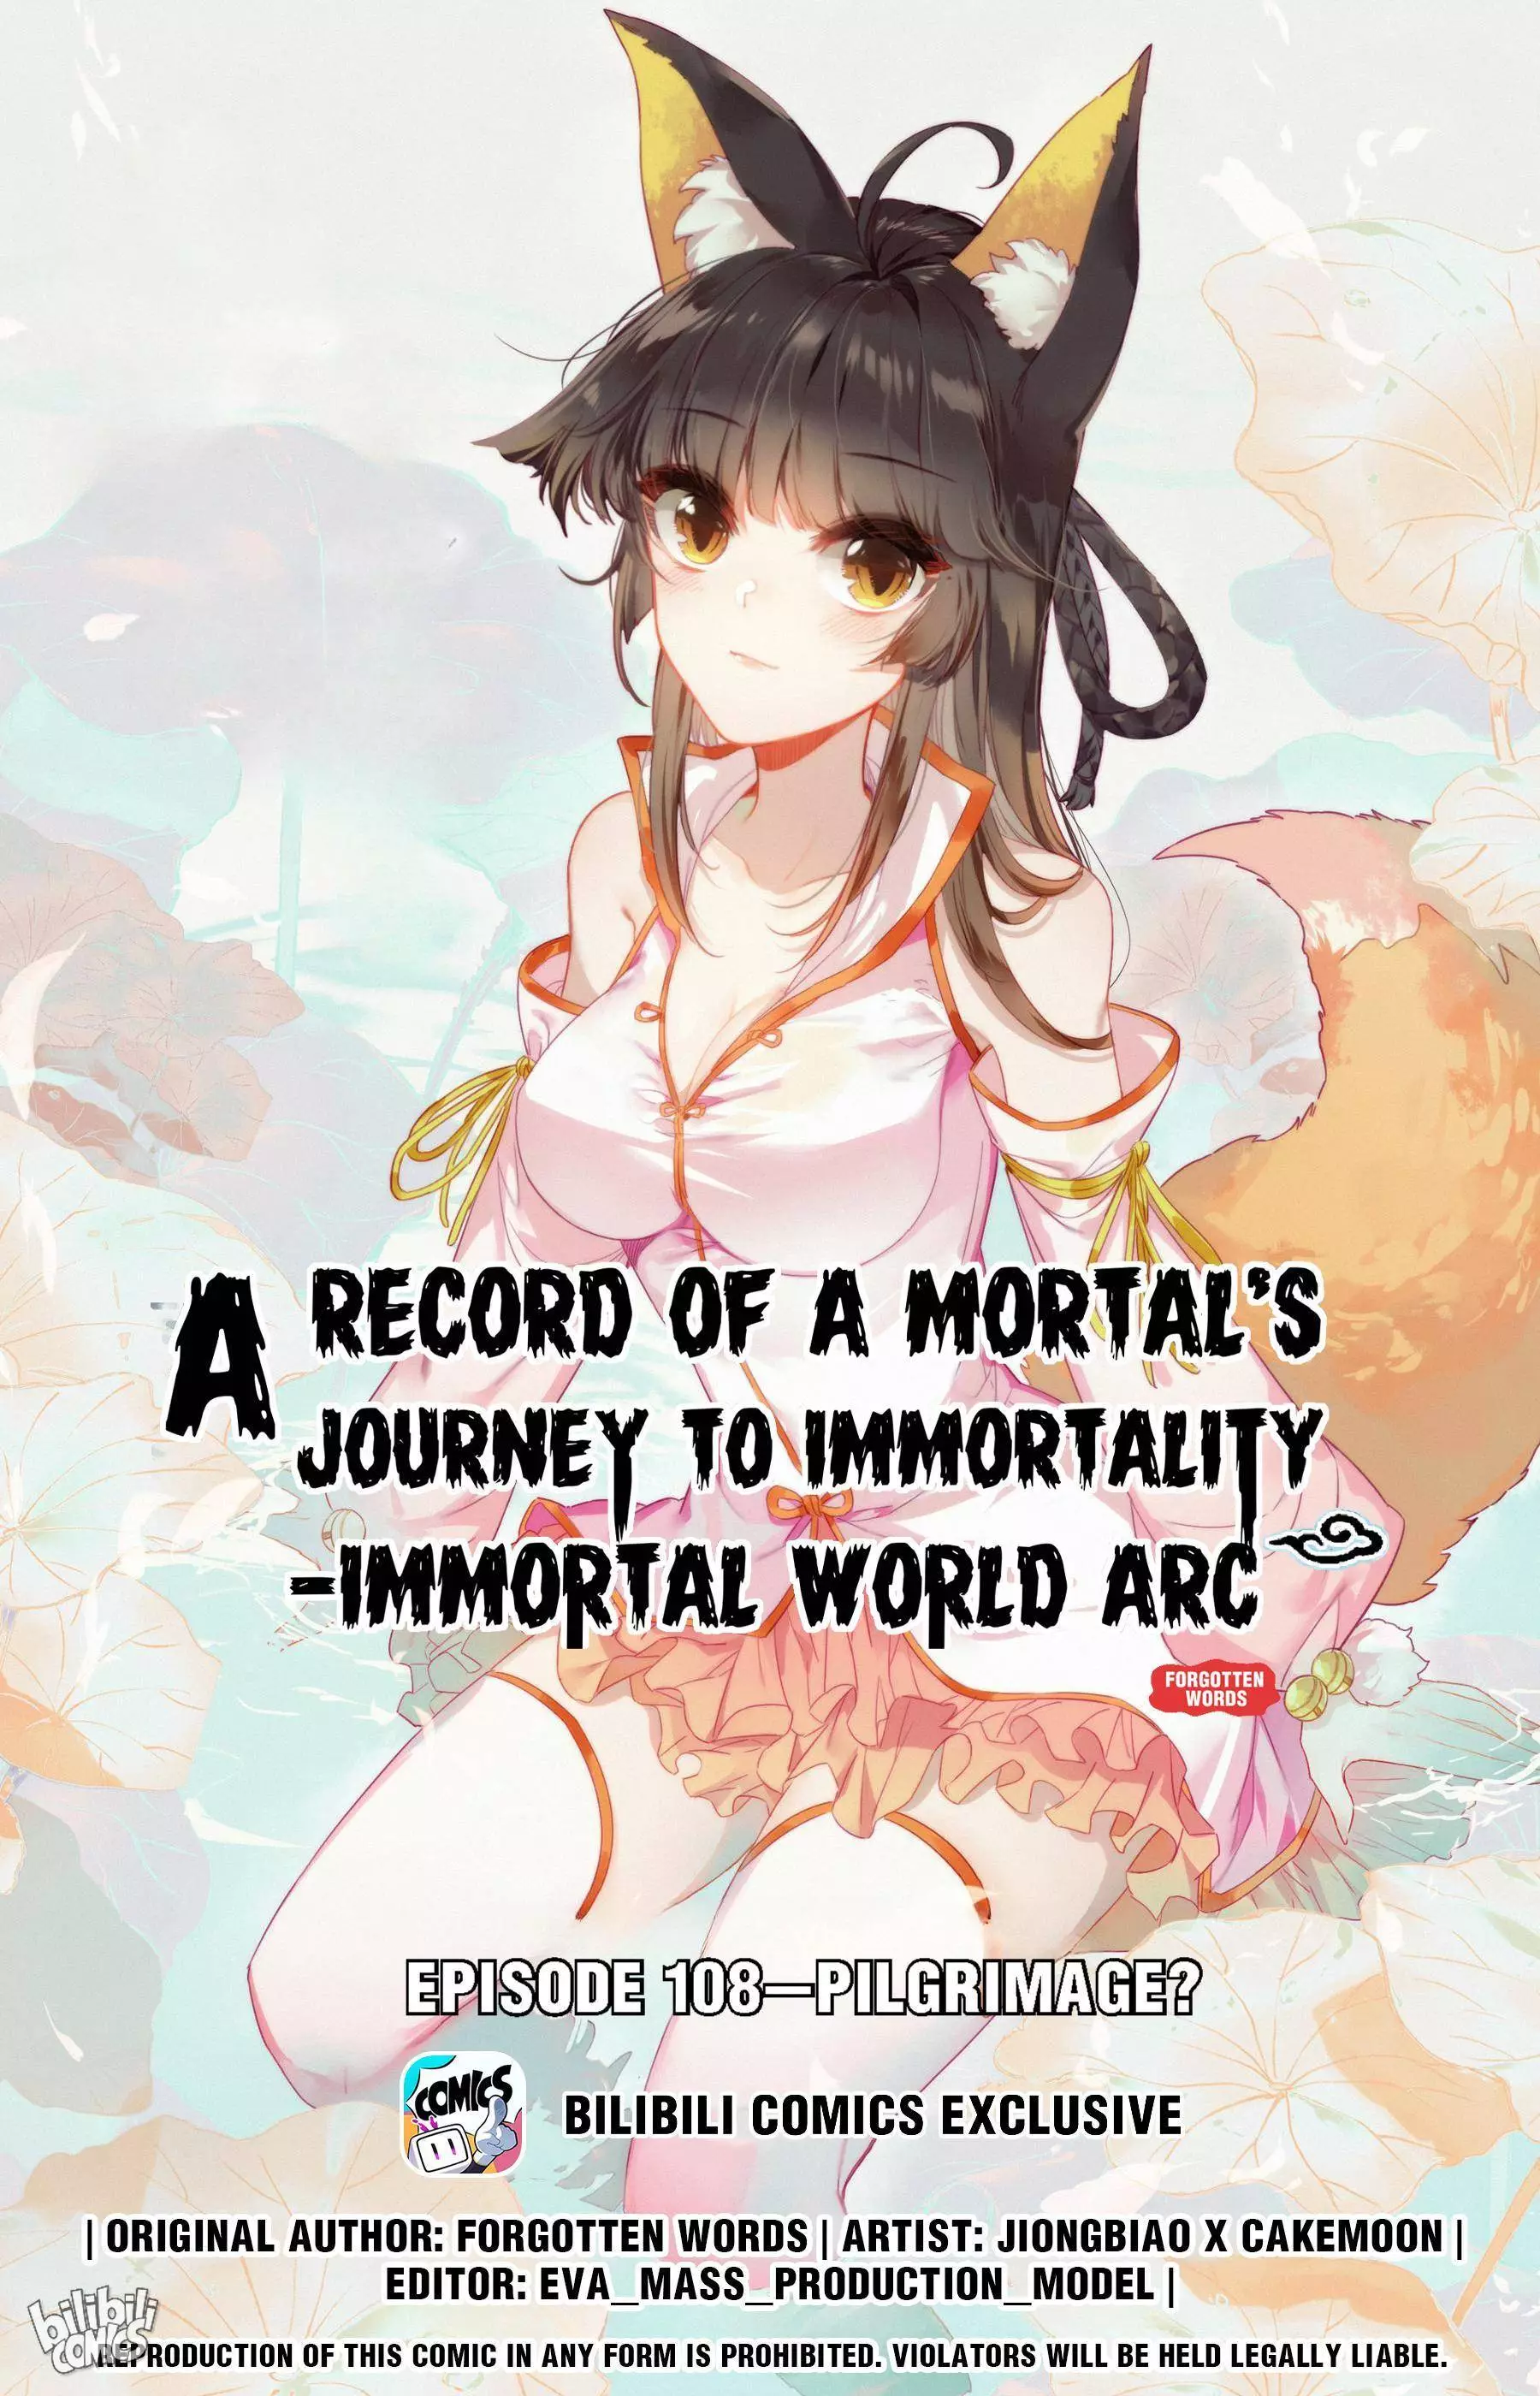 A Record Of A Mortal's Journey To Immortality—Immortal World Arc - 108 page 1-9774bf03